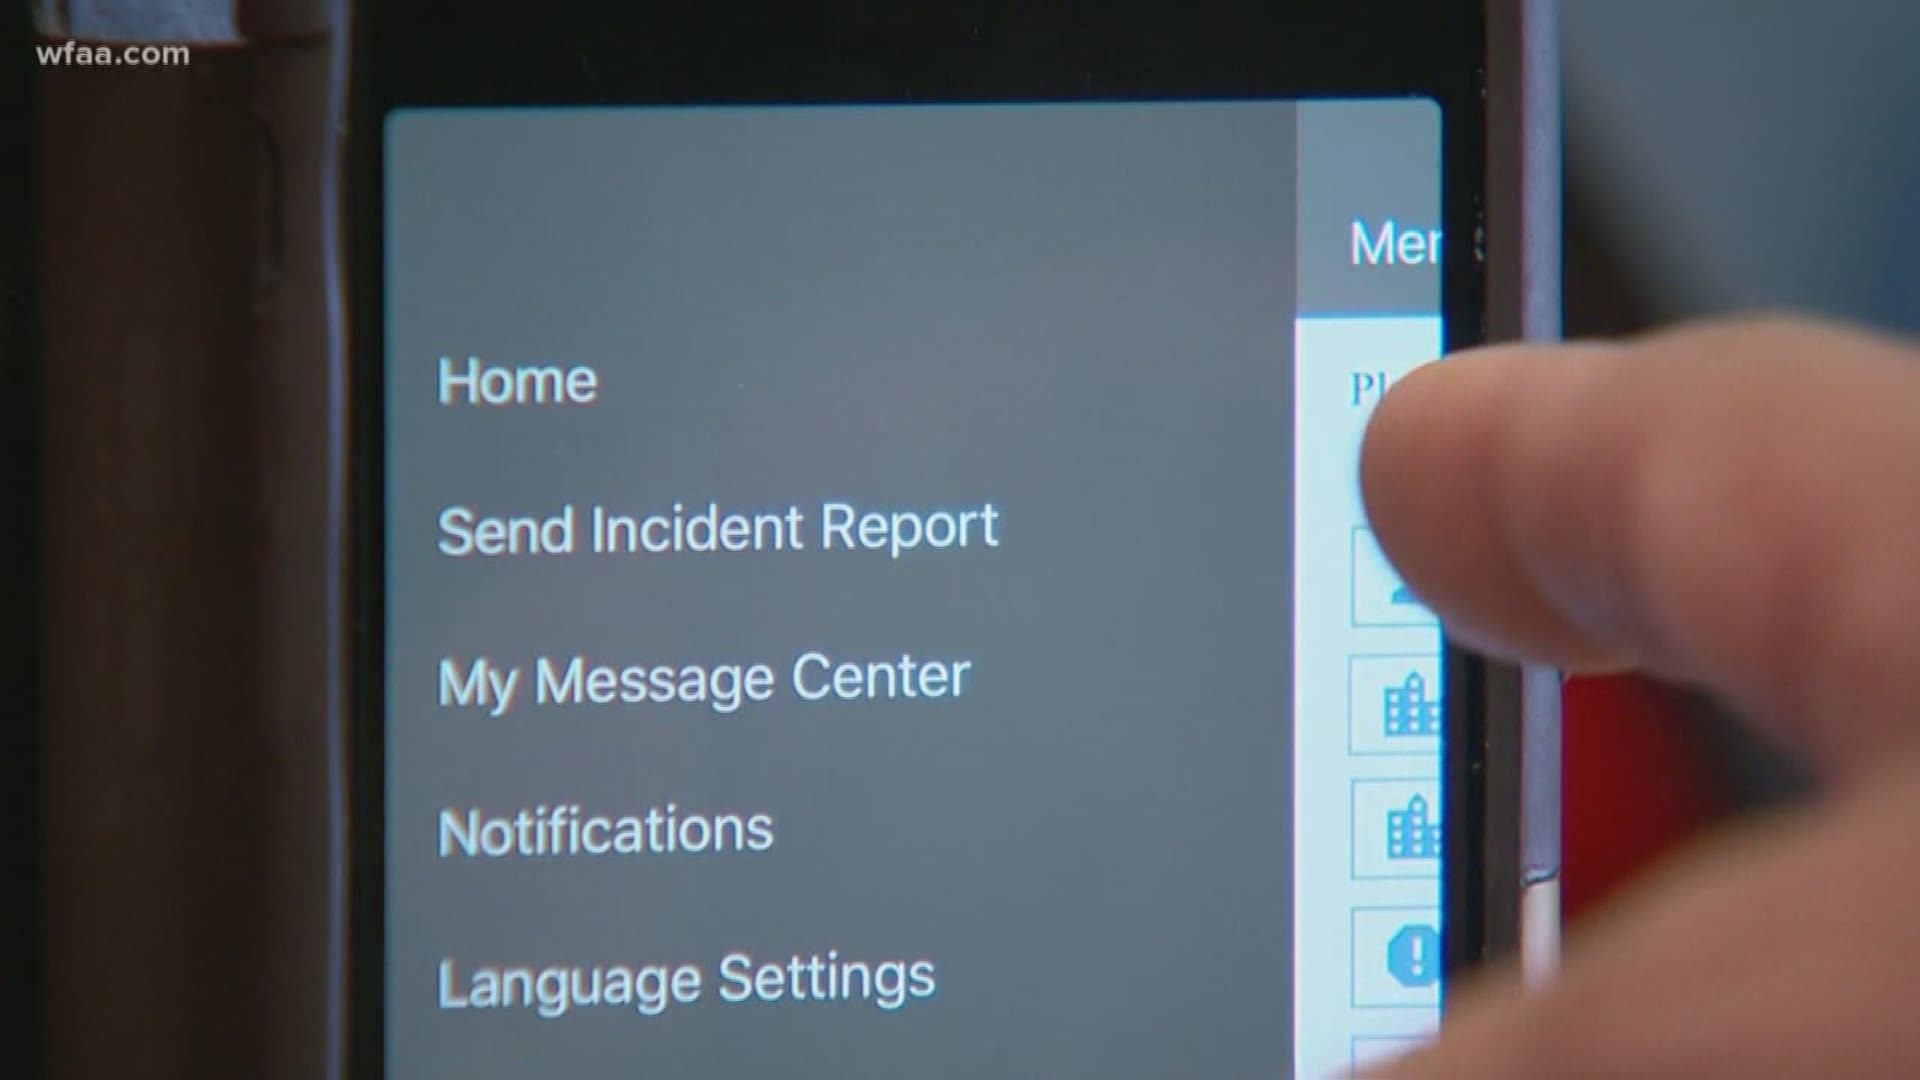 A new app and more safety bags are now standard issue in this North Texas school district.